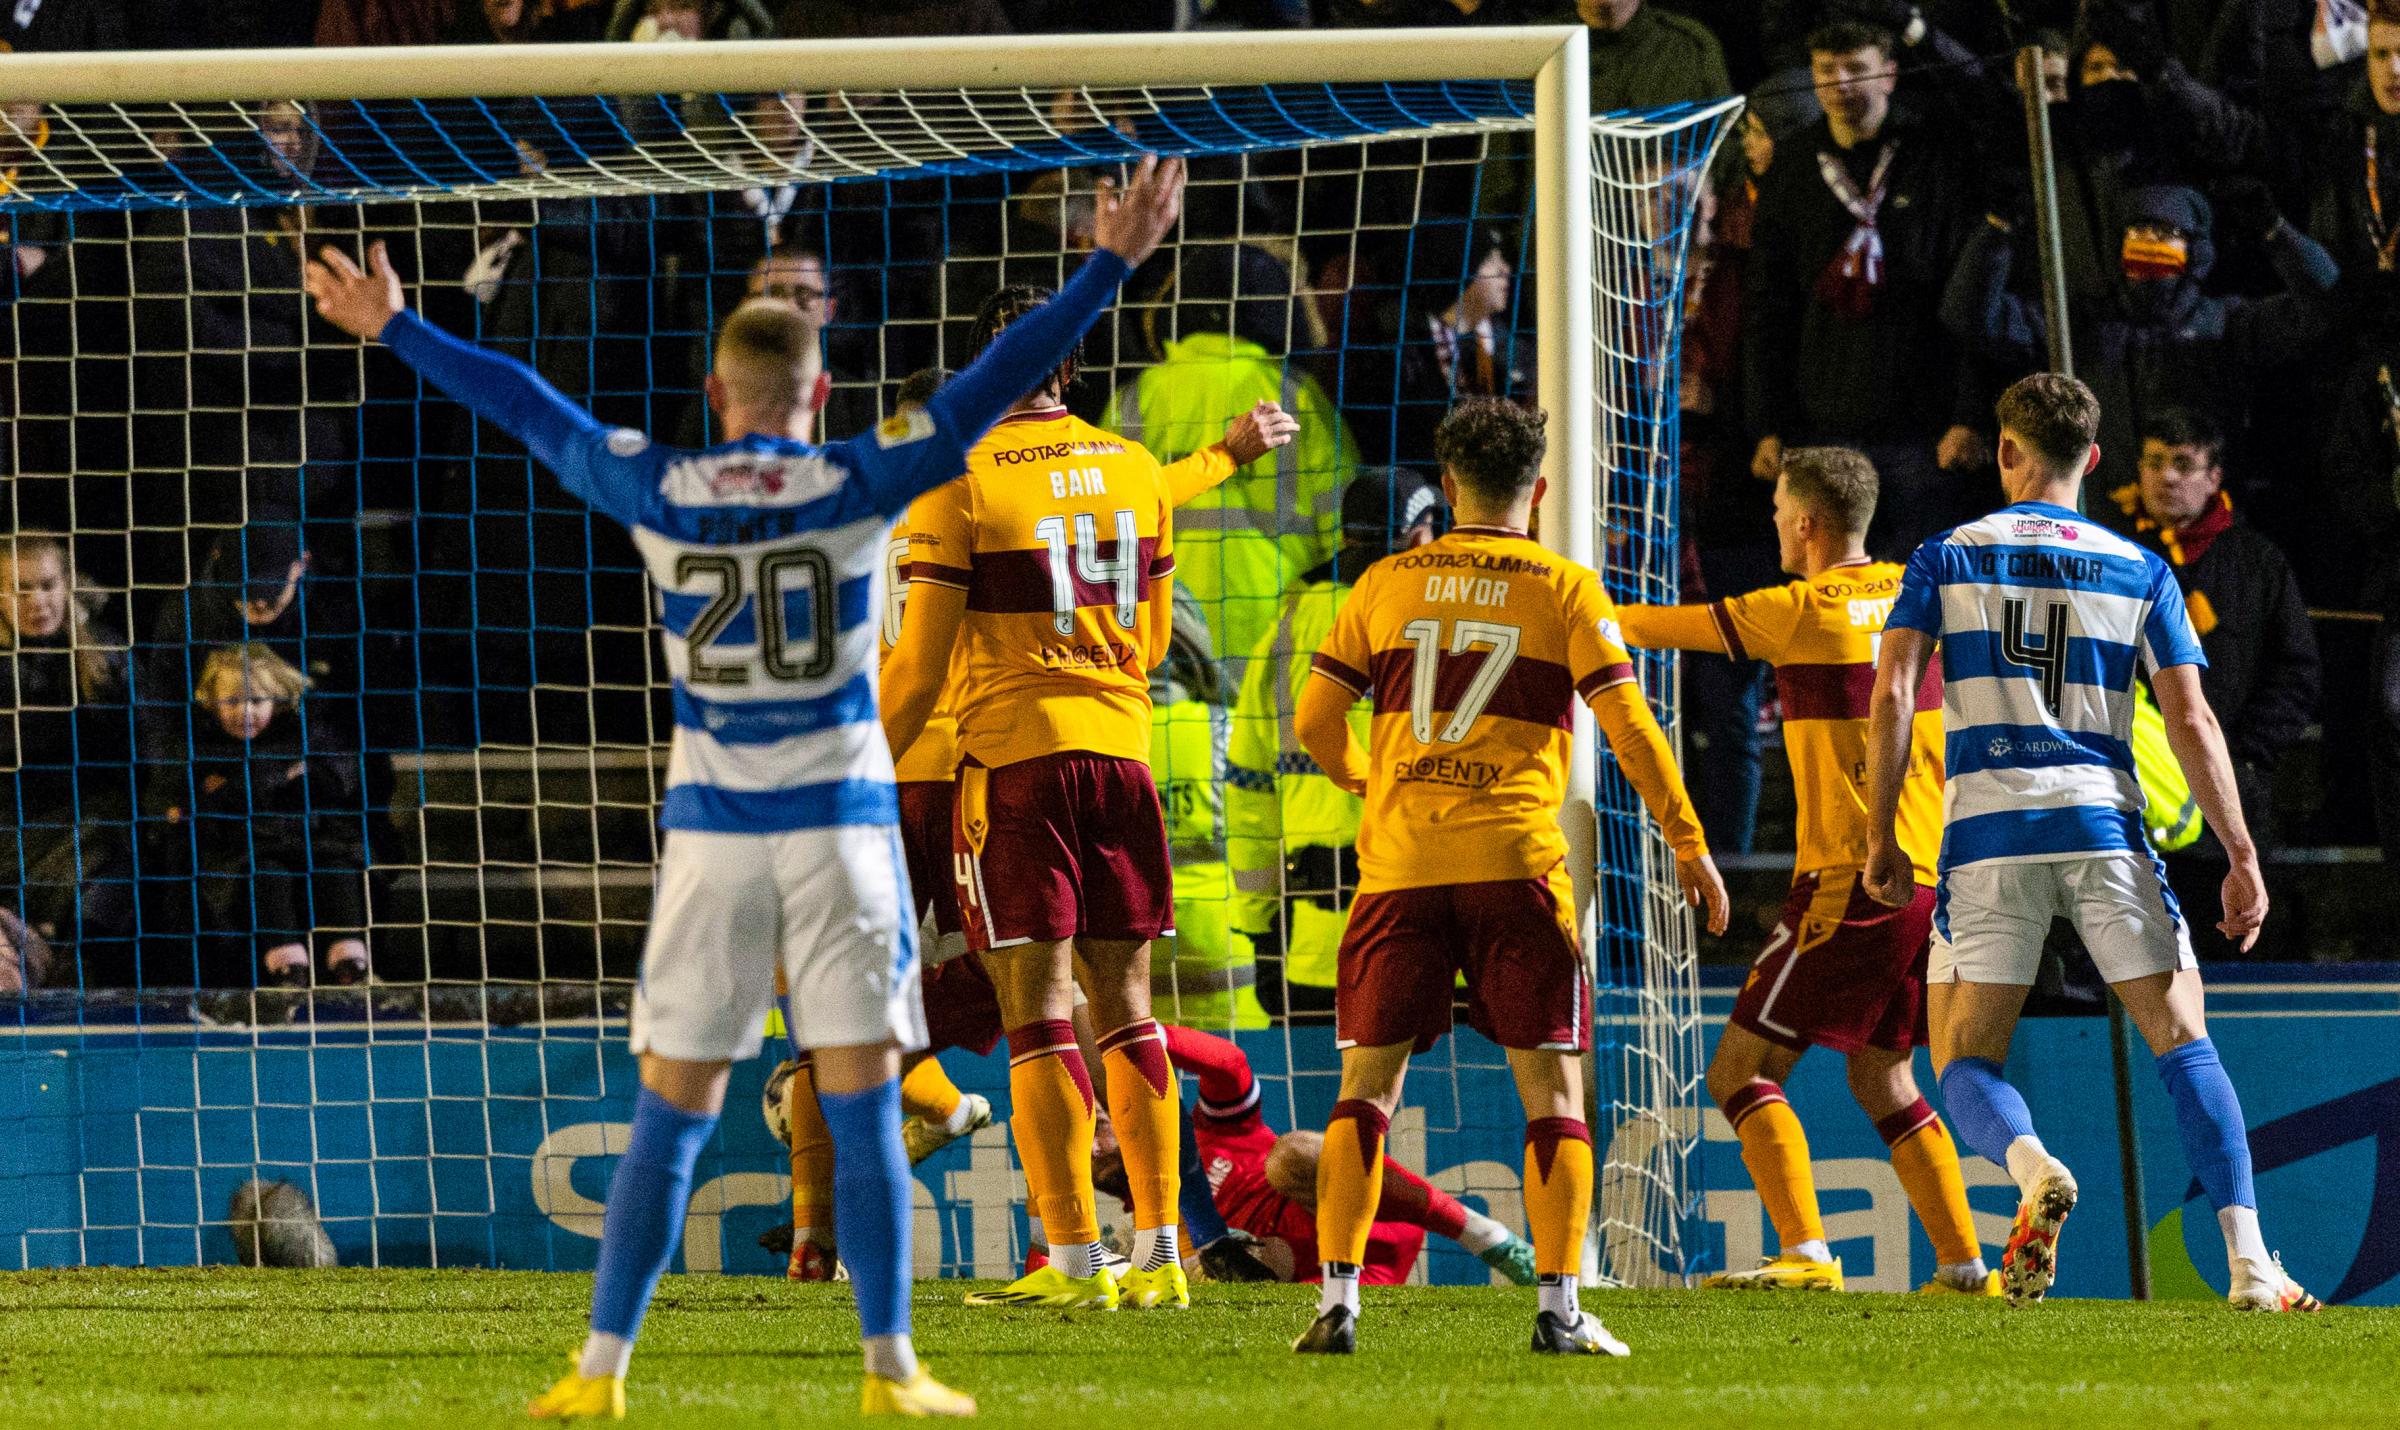 Fans losing faith in Motherwell backline, and backbone